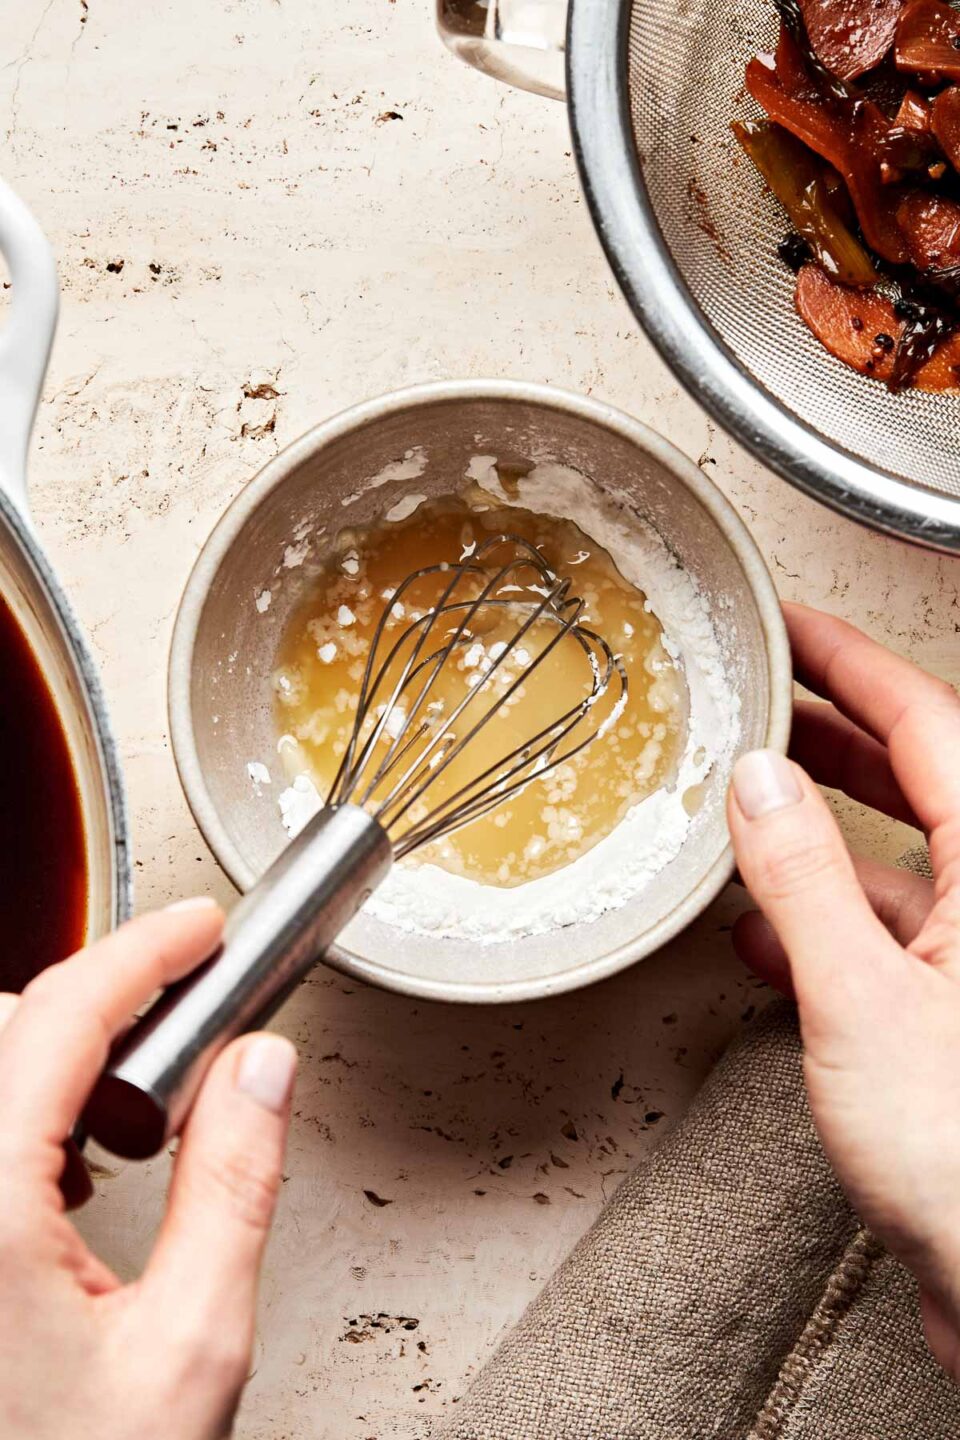 An overhead shot of a woman's hands mixing a cornstarch slurry in a beige stoneware bowl atop a textured beige surface. A strainer with strained aromatics and the pot of braising liquid sit alongside the bowl.